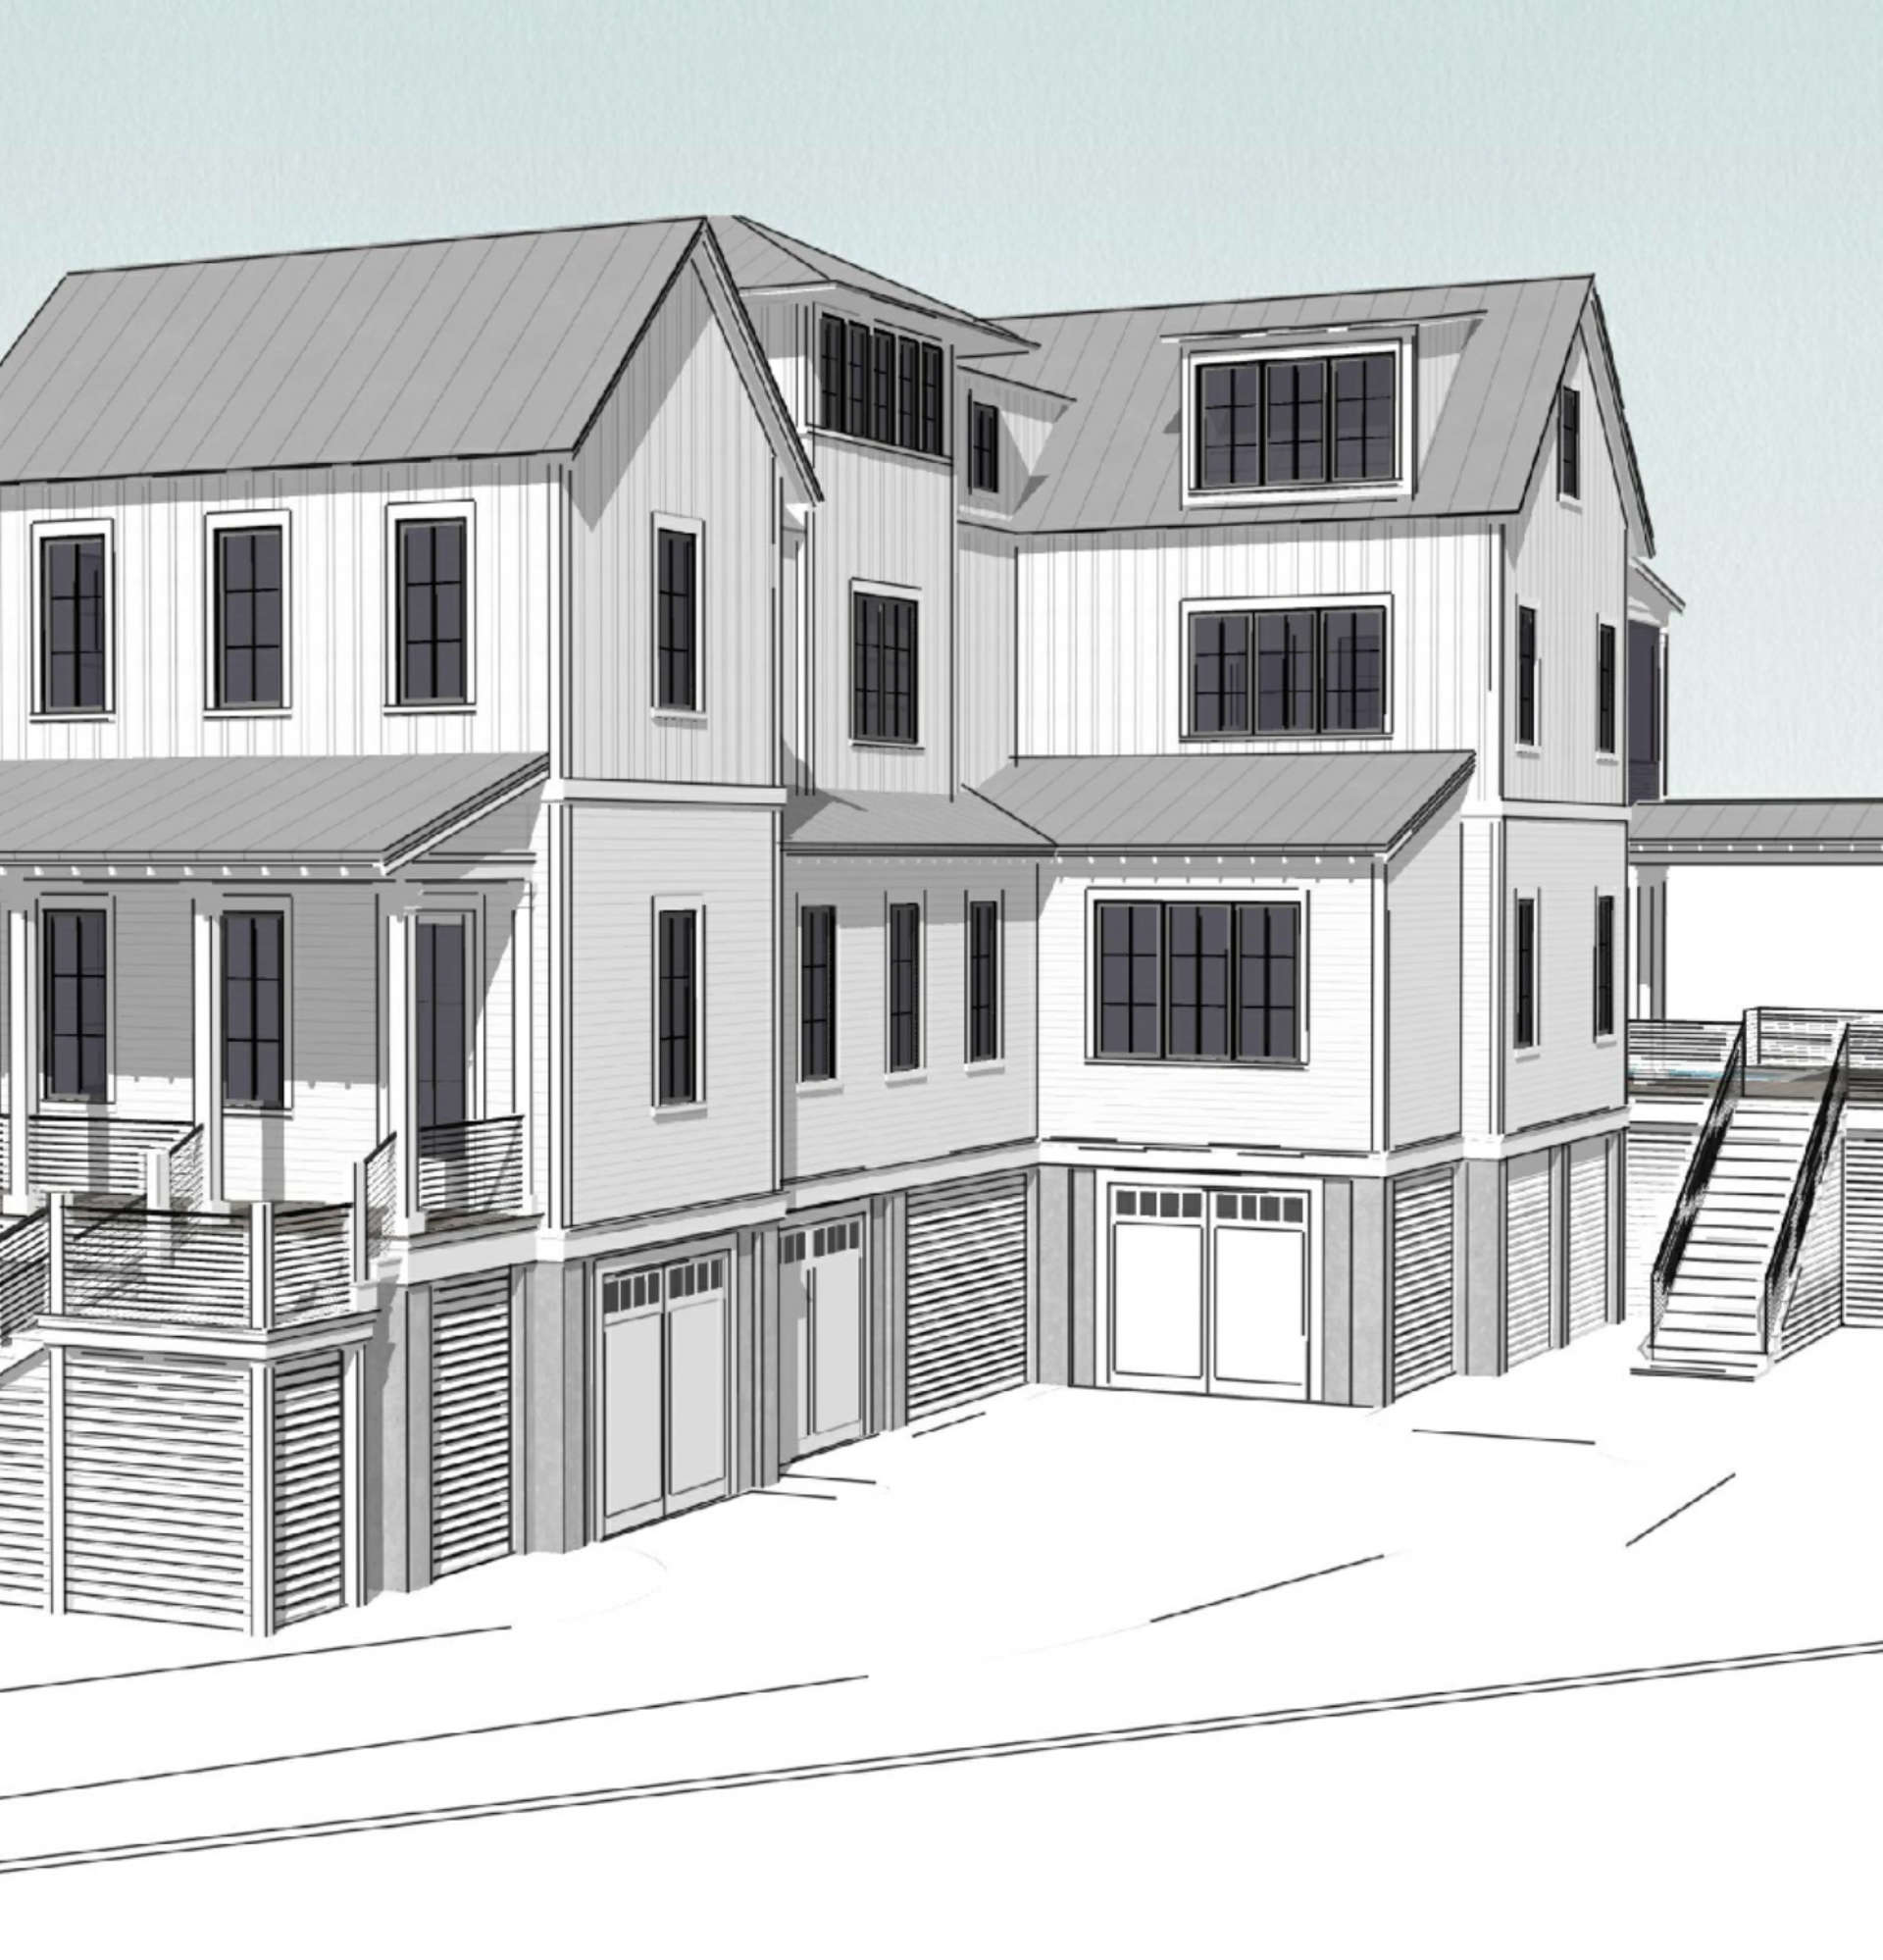 15 of 36. Home renderings are to act as aid in lot visualization. Only lot for sale.